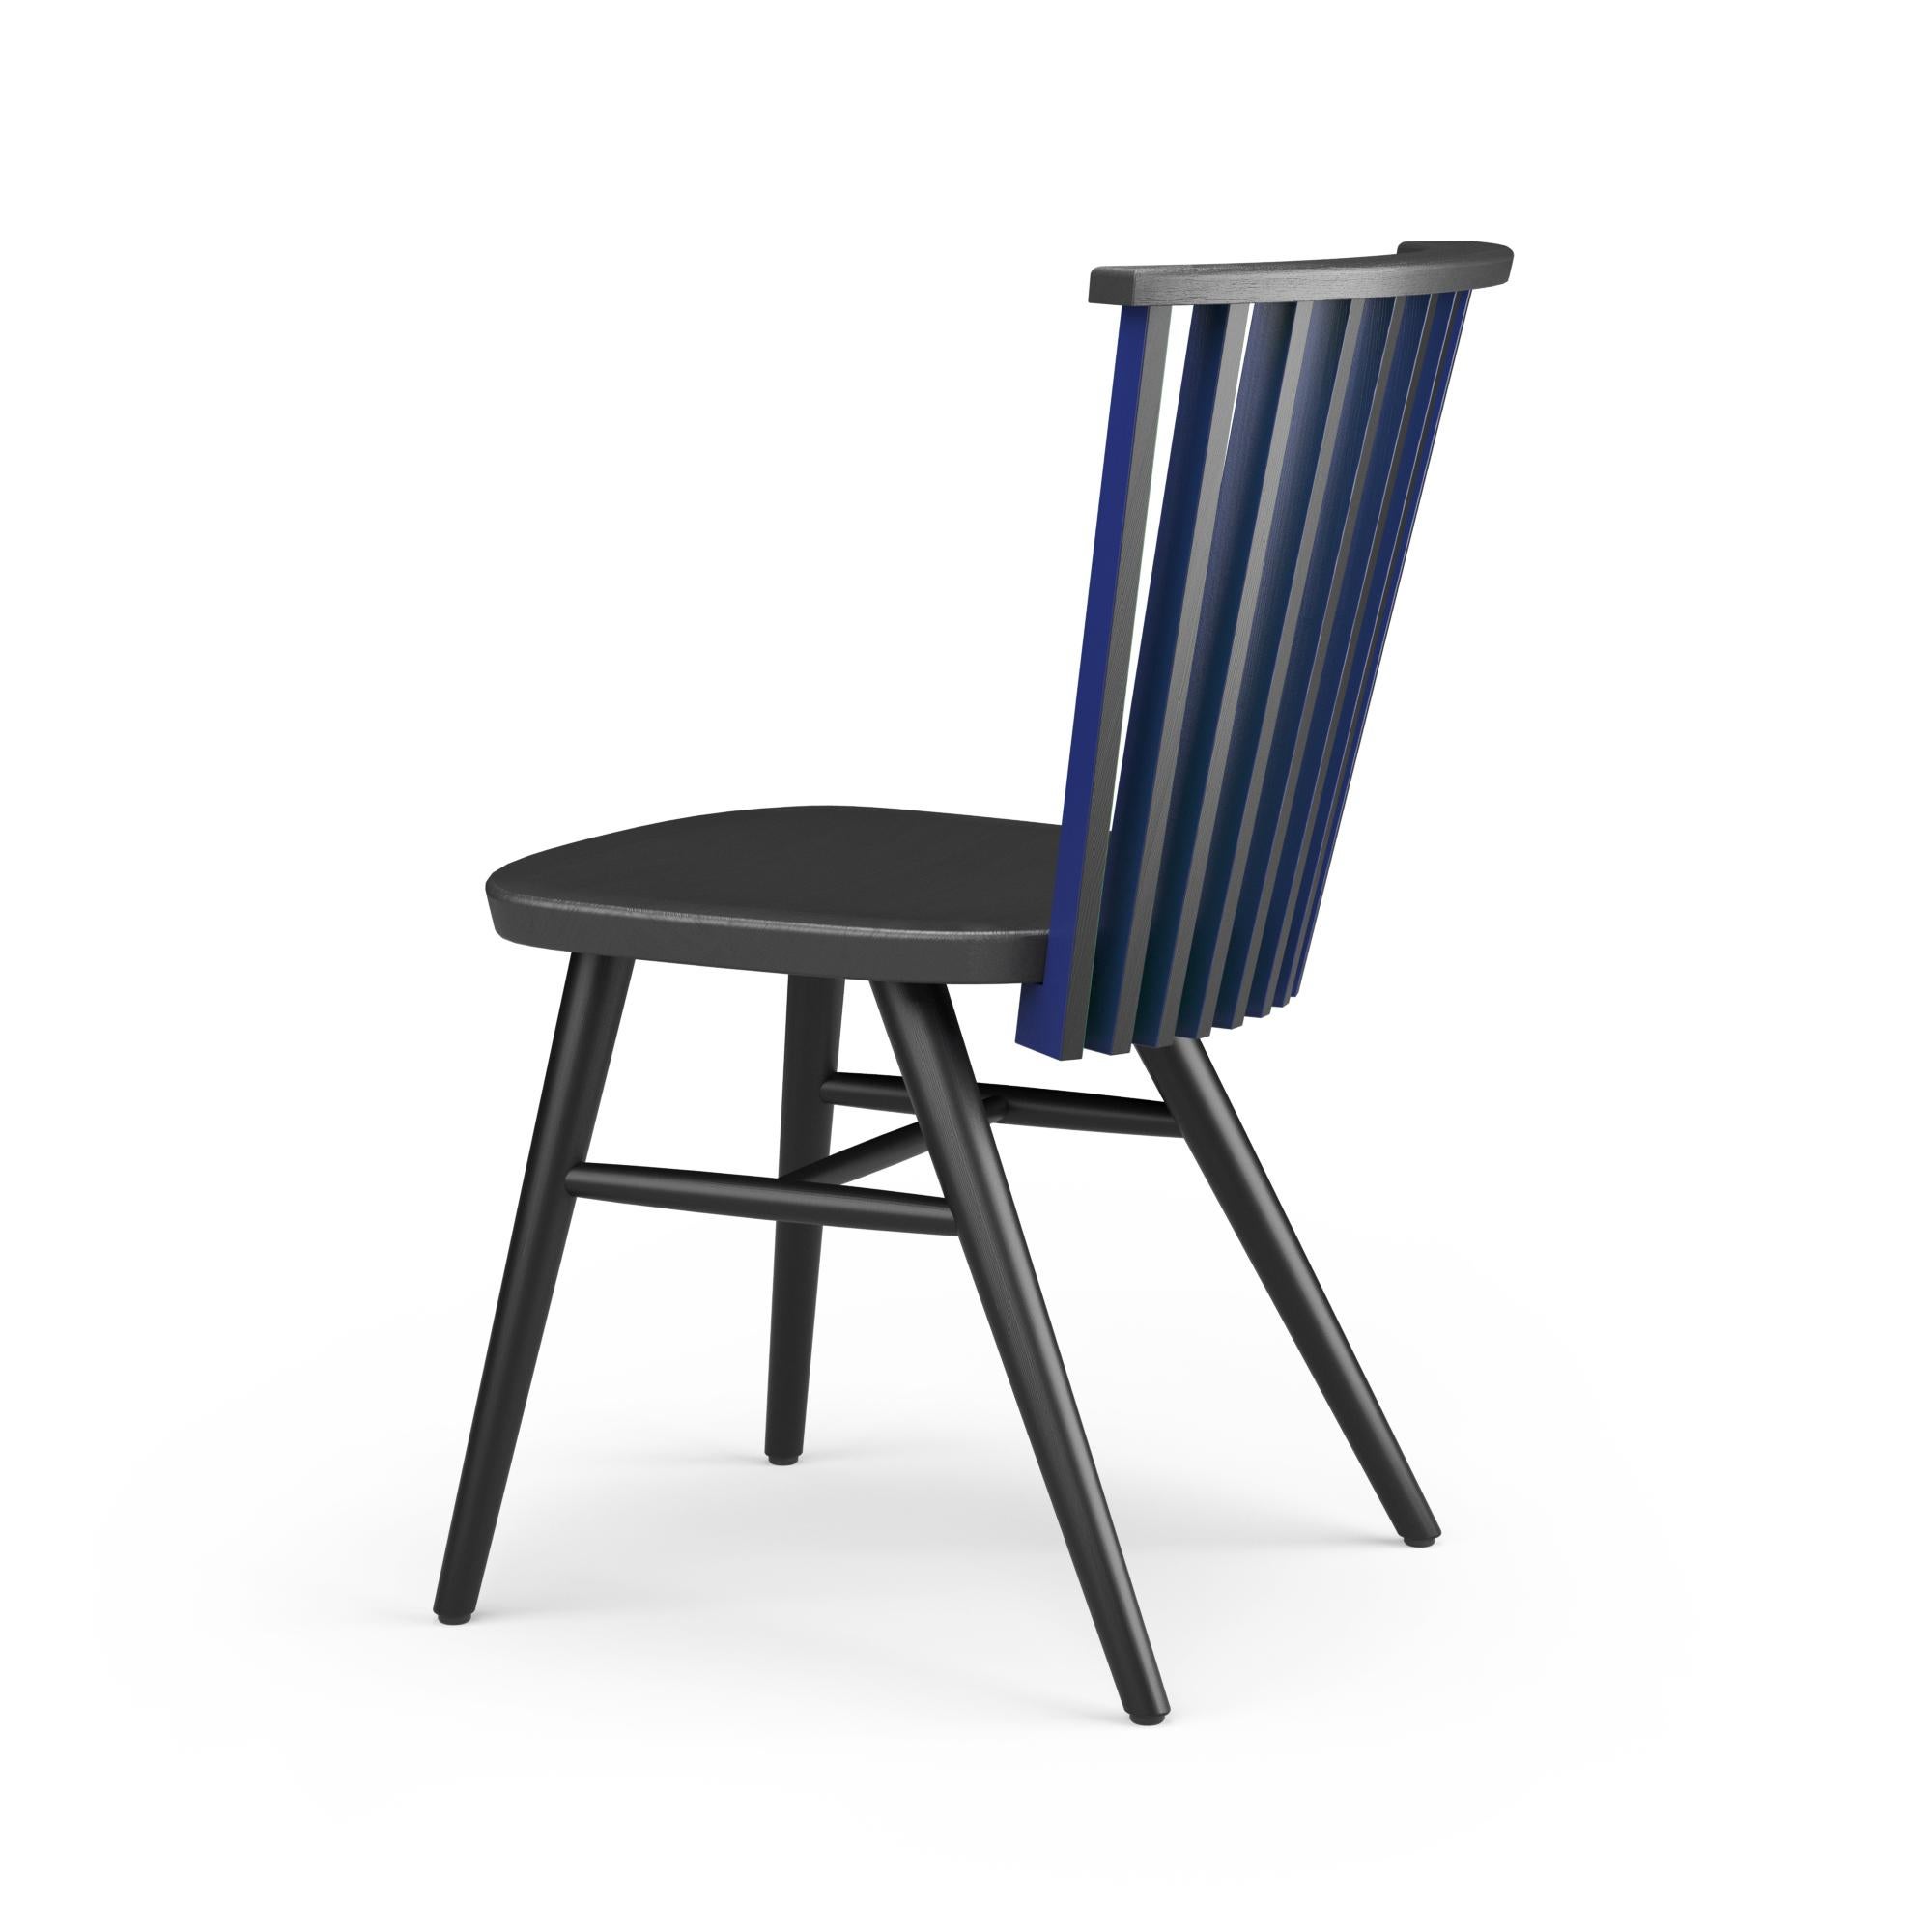 Modern Hayche, Tornasol chair, Black, Green & Blue, Solid Wood, UK, Made To Order For Sale